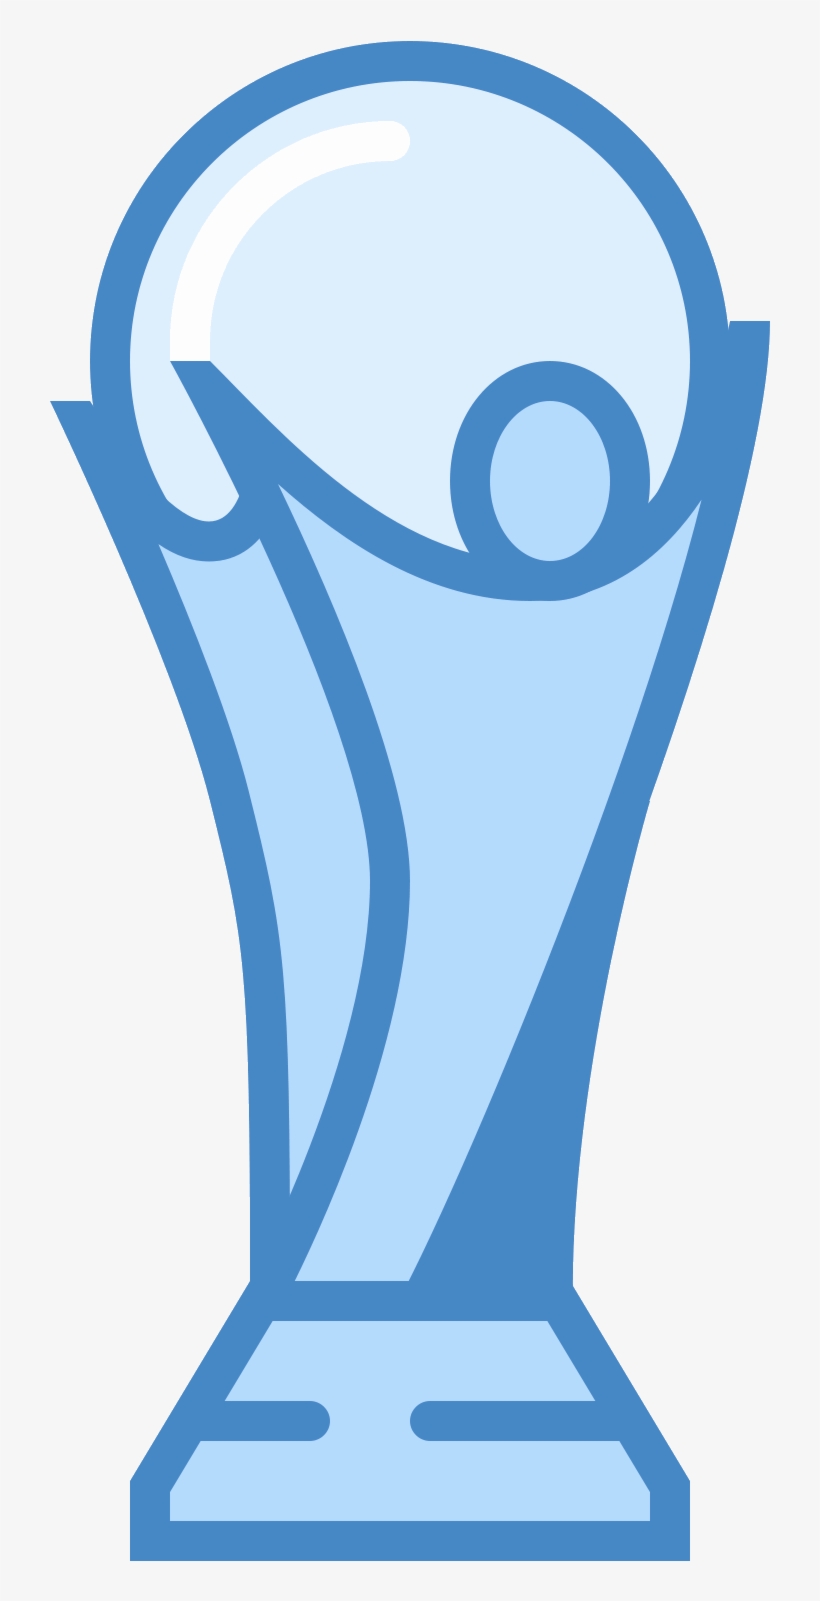 World Cup Icon - Worldcup Icon, transparent png #5884625